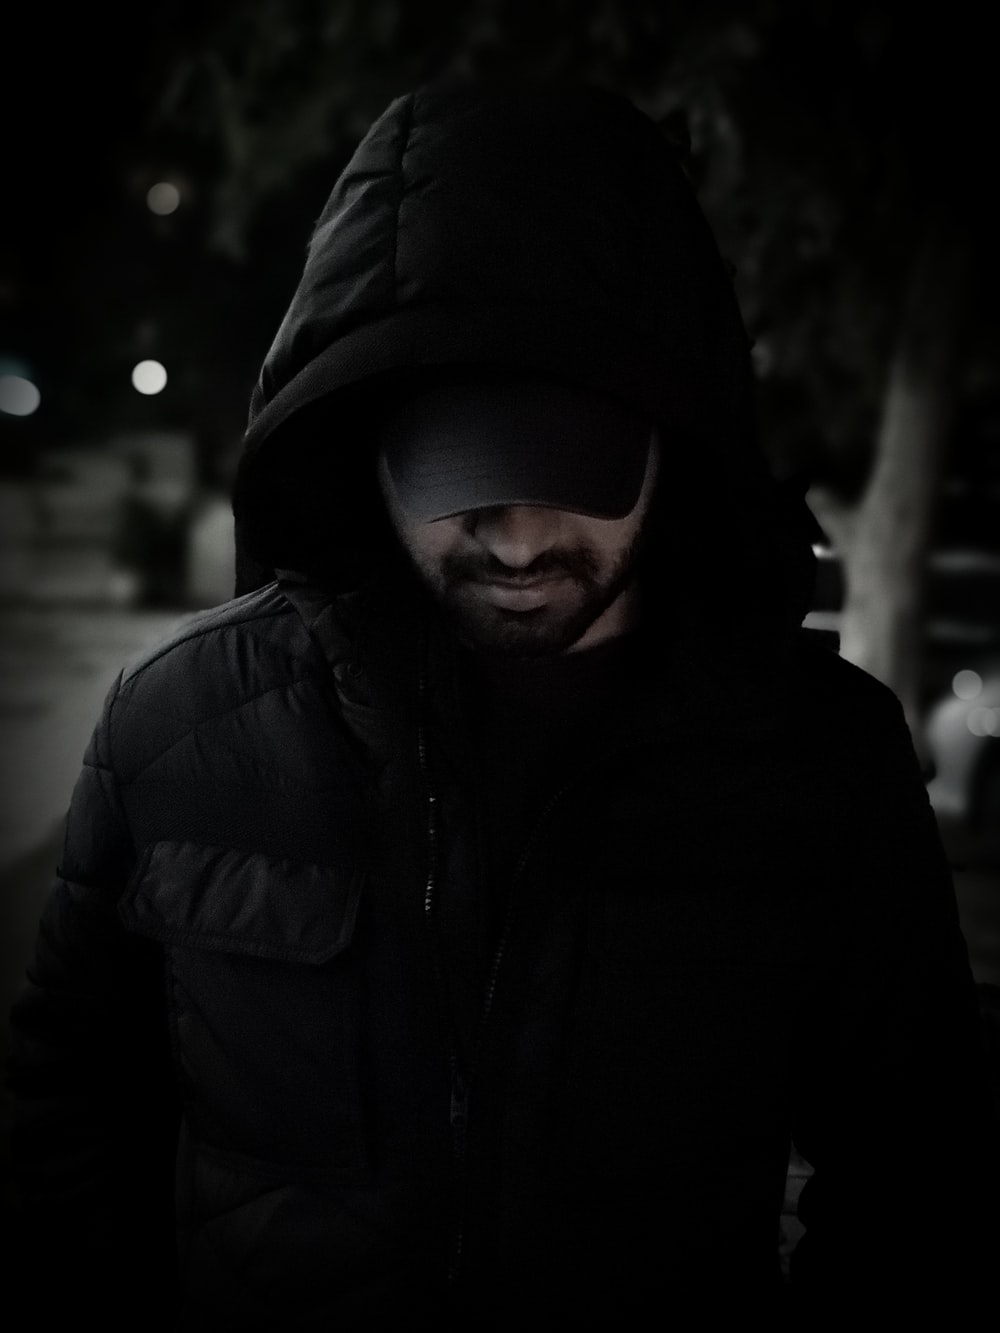 Man In Hoodie Picture. Download Free Image